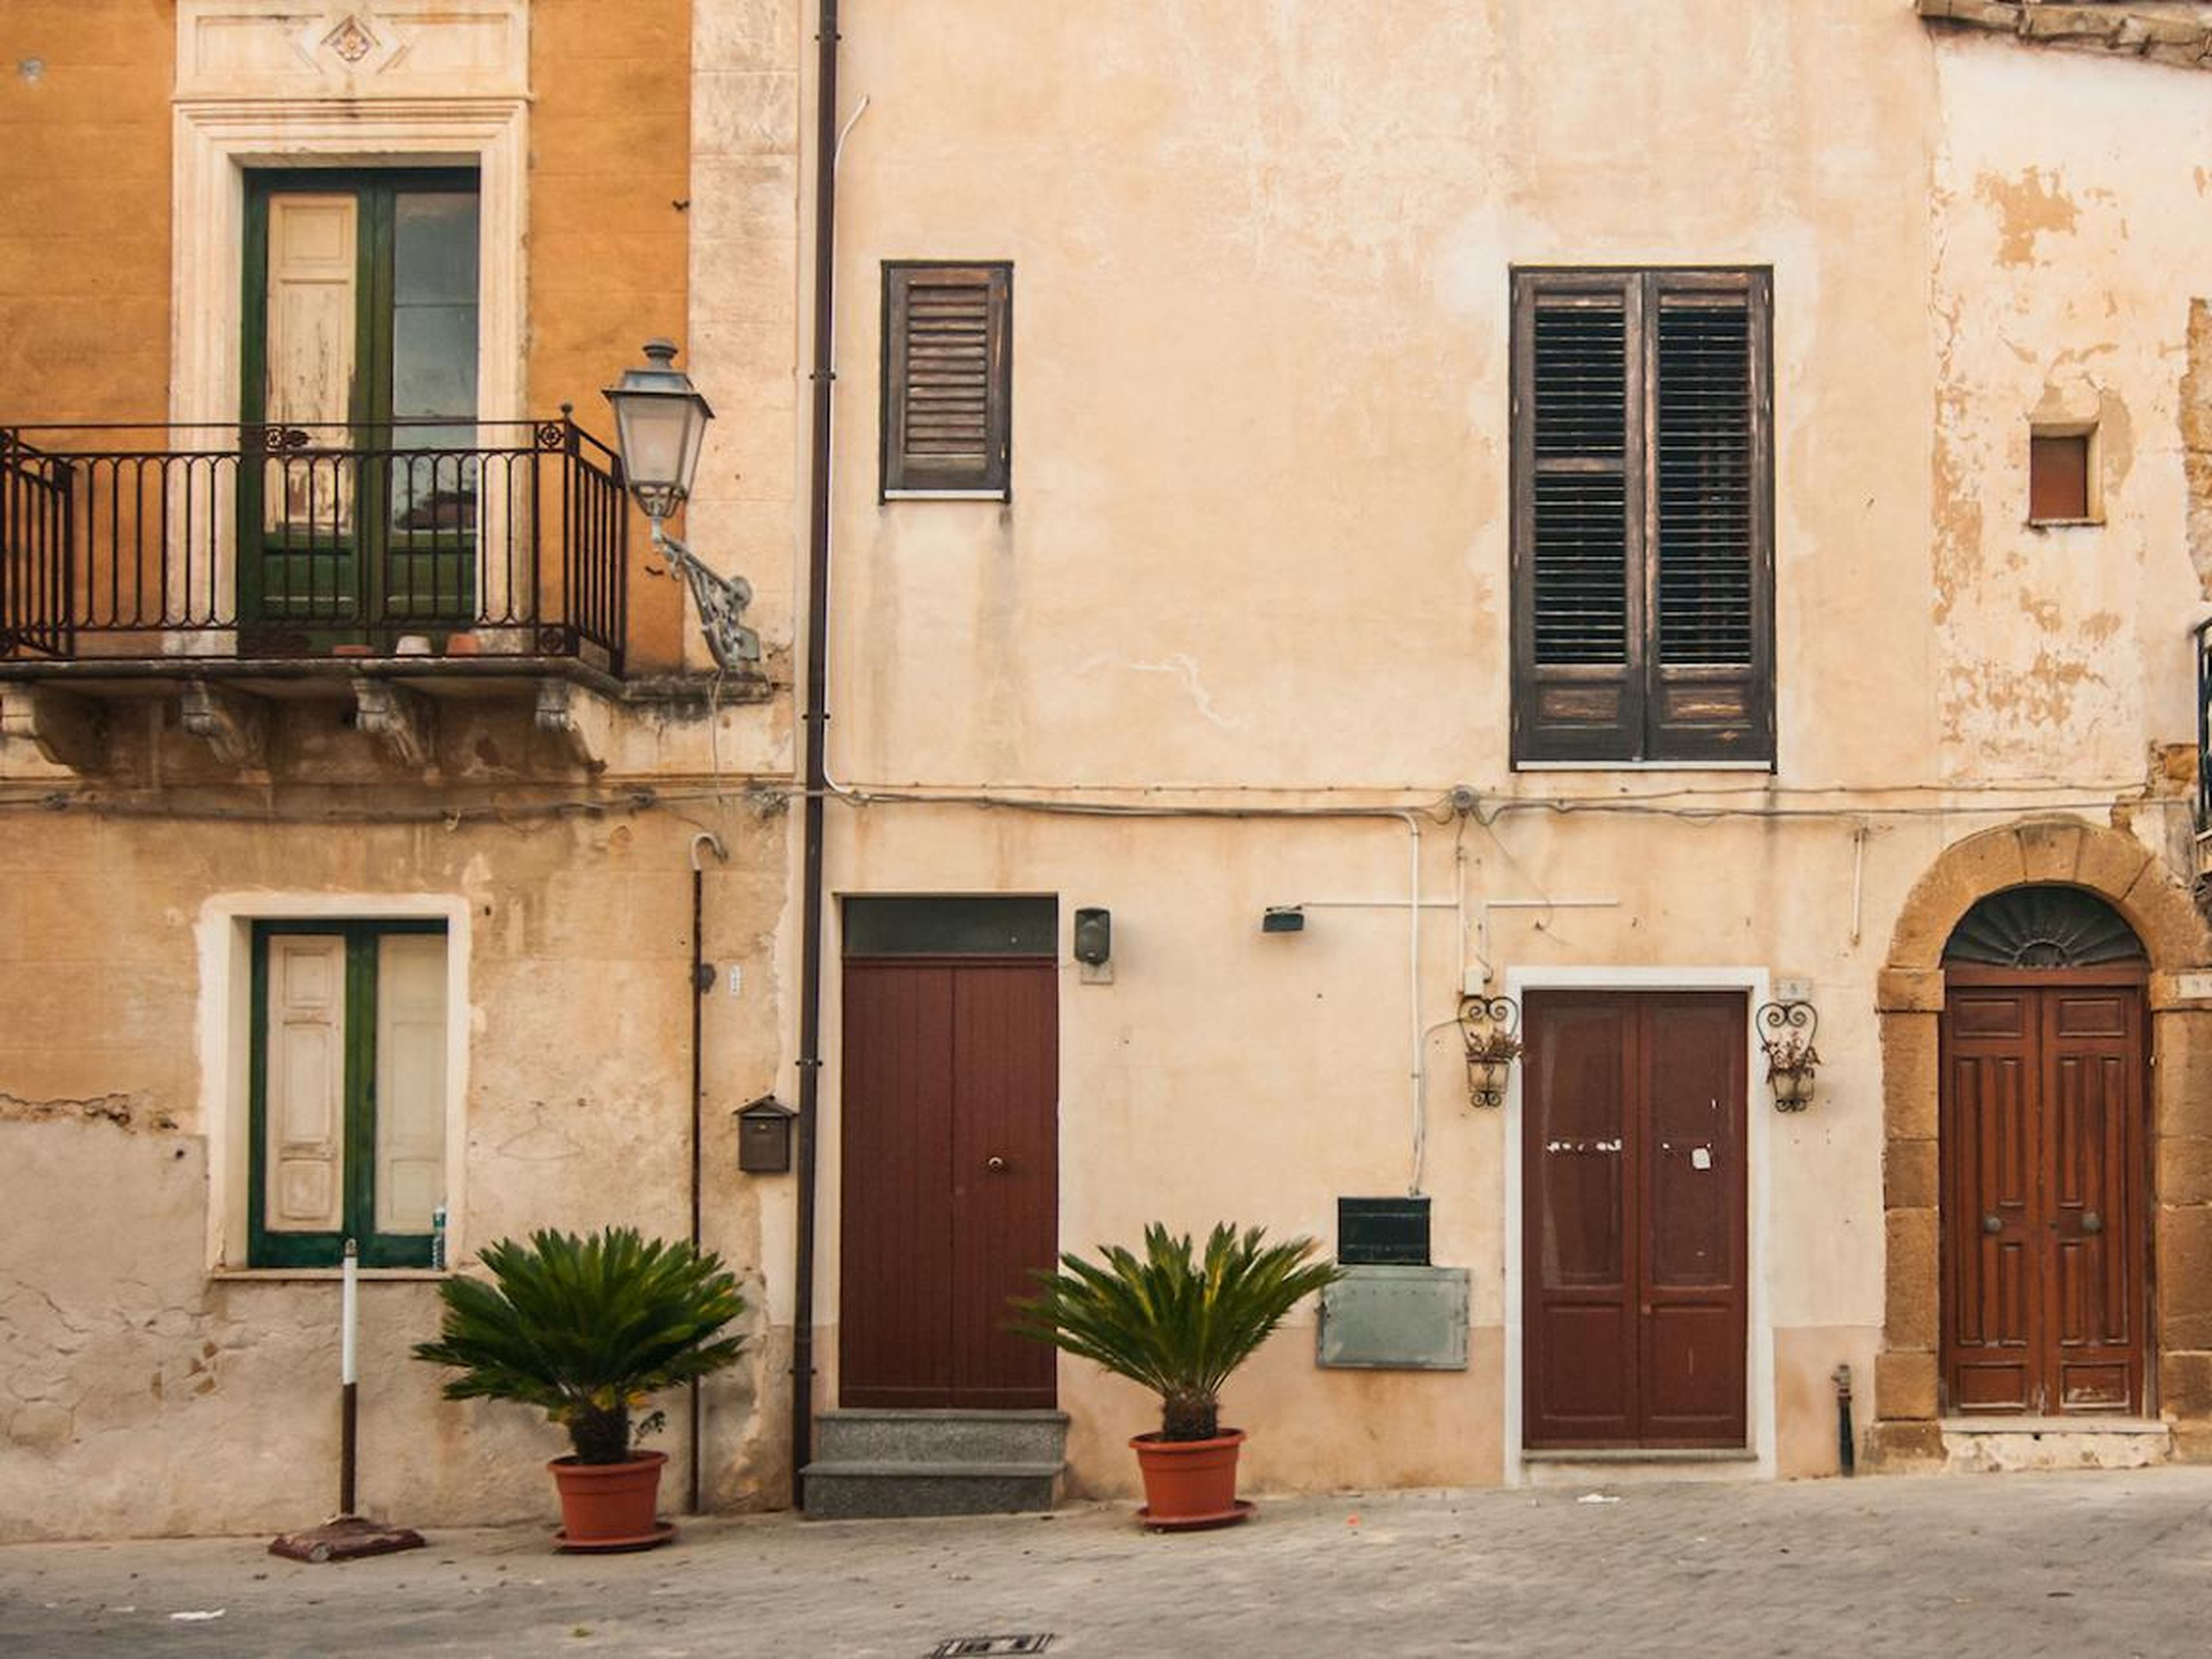 A picturesque town in Sicily is selling off homes for $1 to anyone willing to renovate them